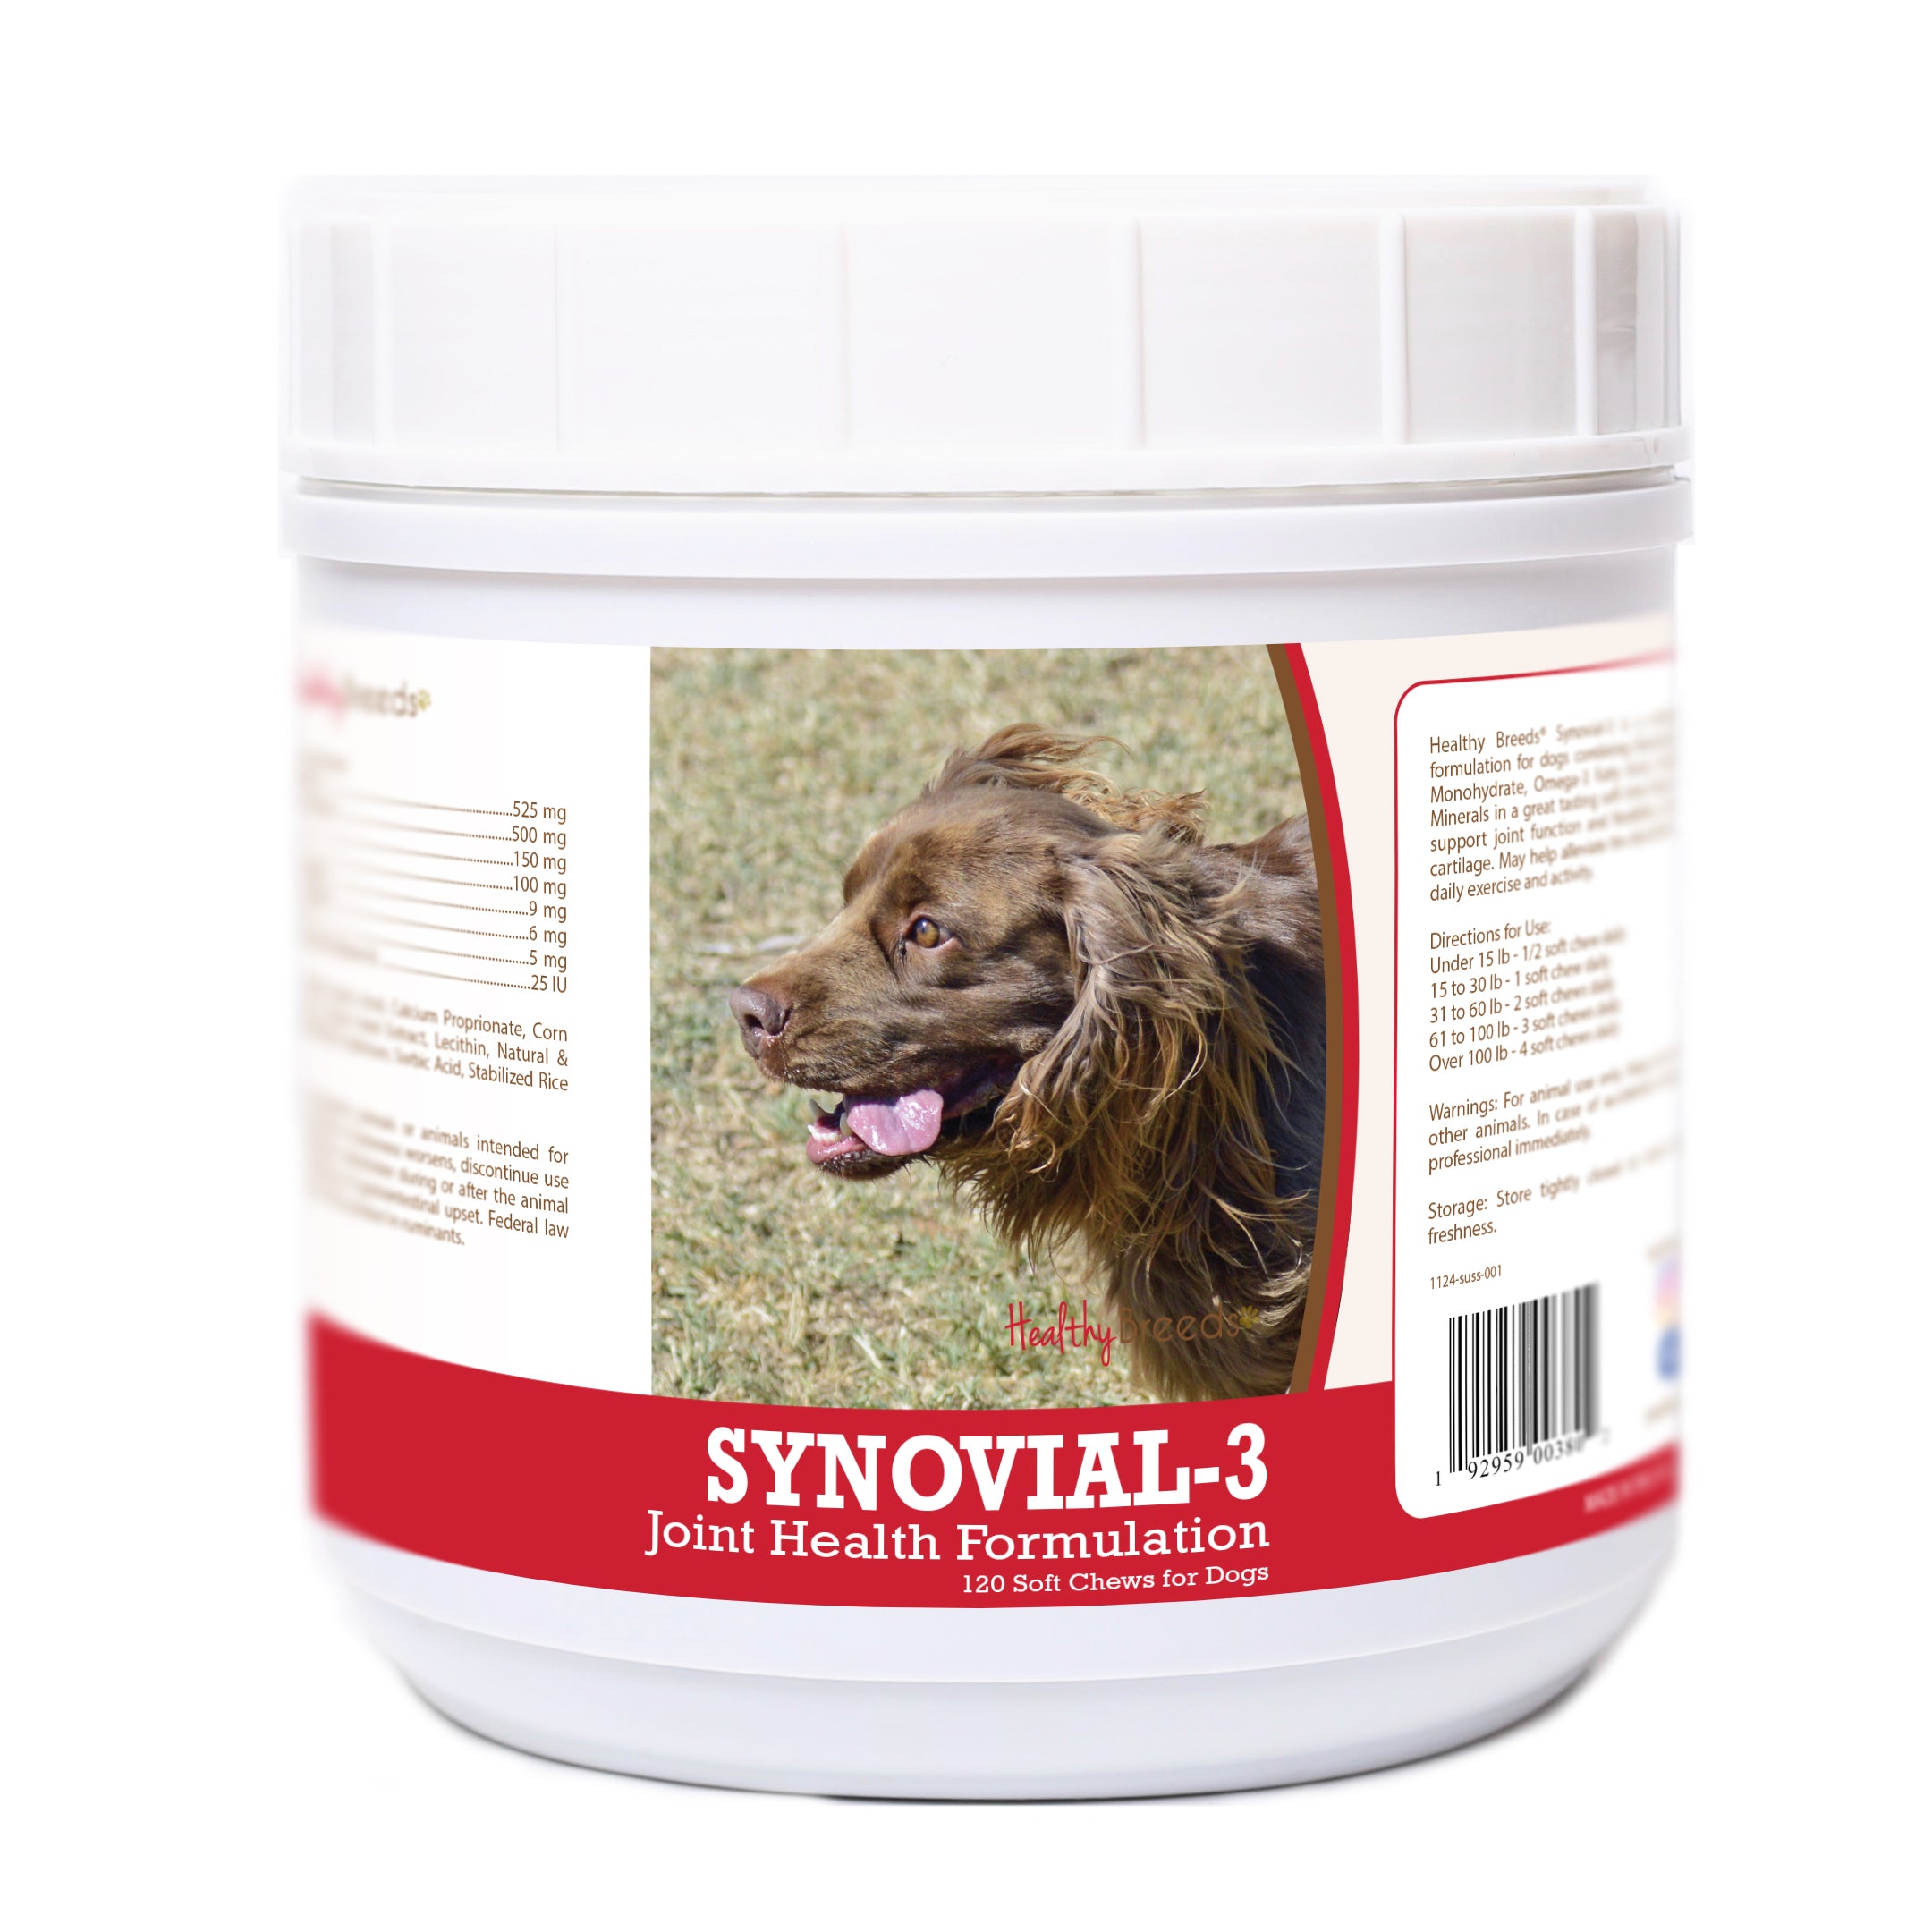 Sussex Spaniel Synovial-3 Joint Health Formulation Soft Chews 120 Count